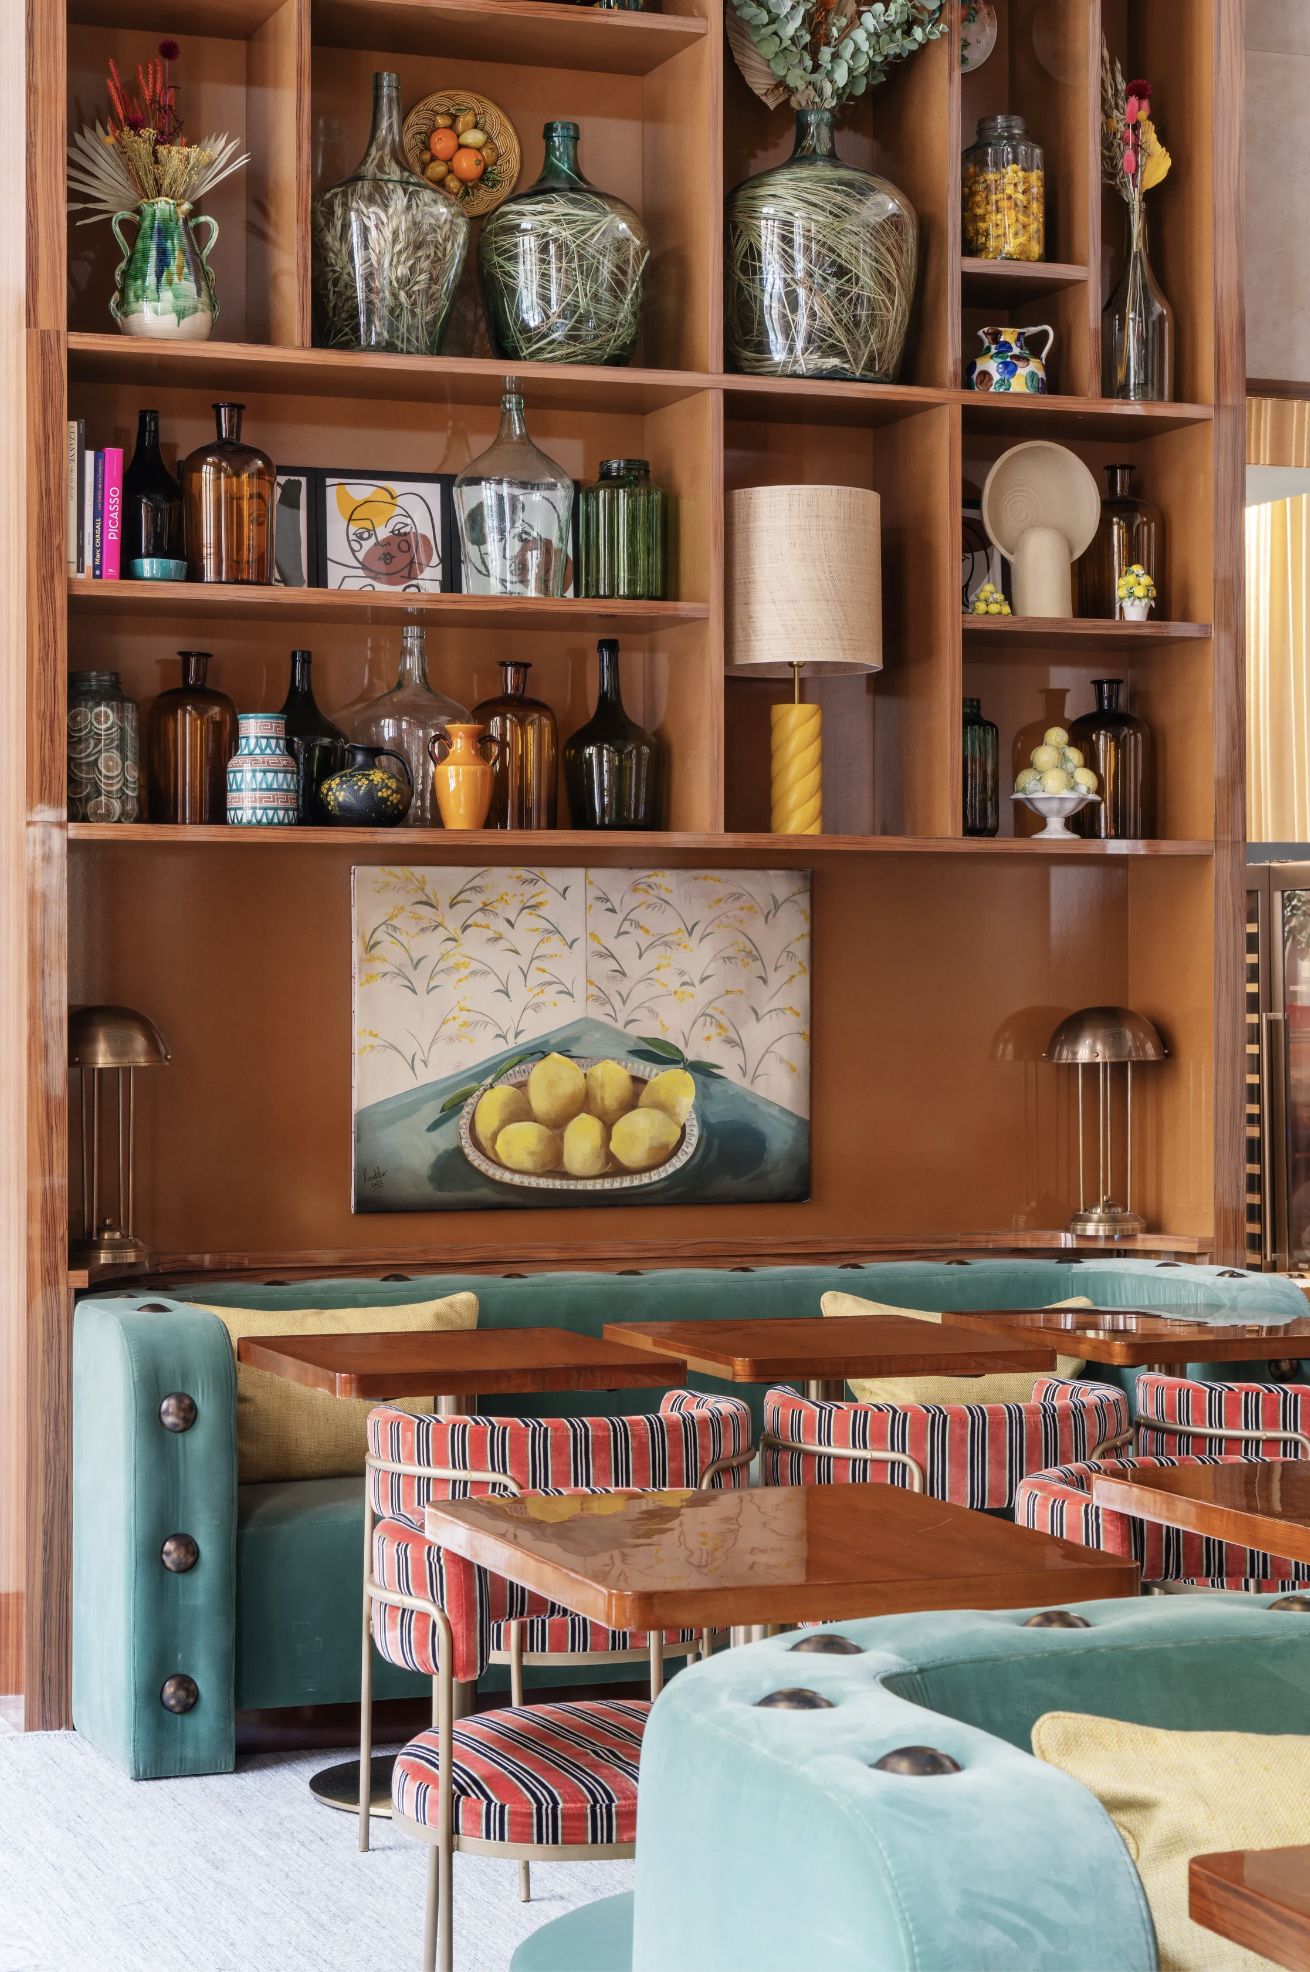 Eclectic interiors of Mimosa Paris iwth teal velvet banquette seating, striped fabric chairs and a wooden bookshelf filled with mismatched glass jugs and urns